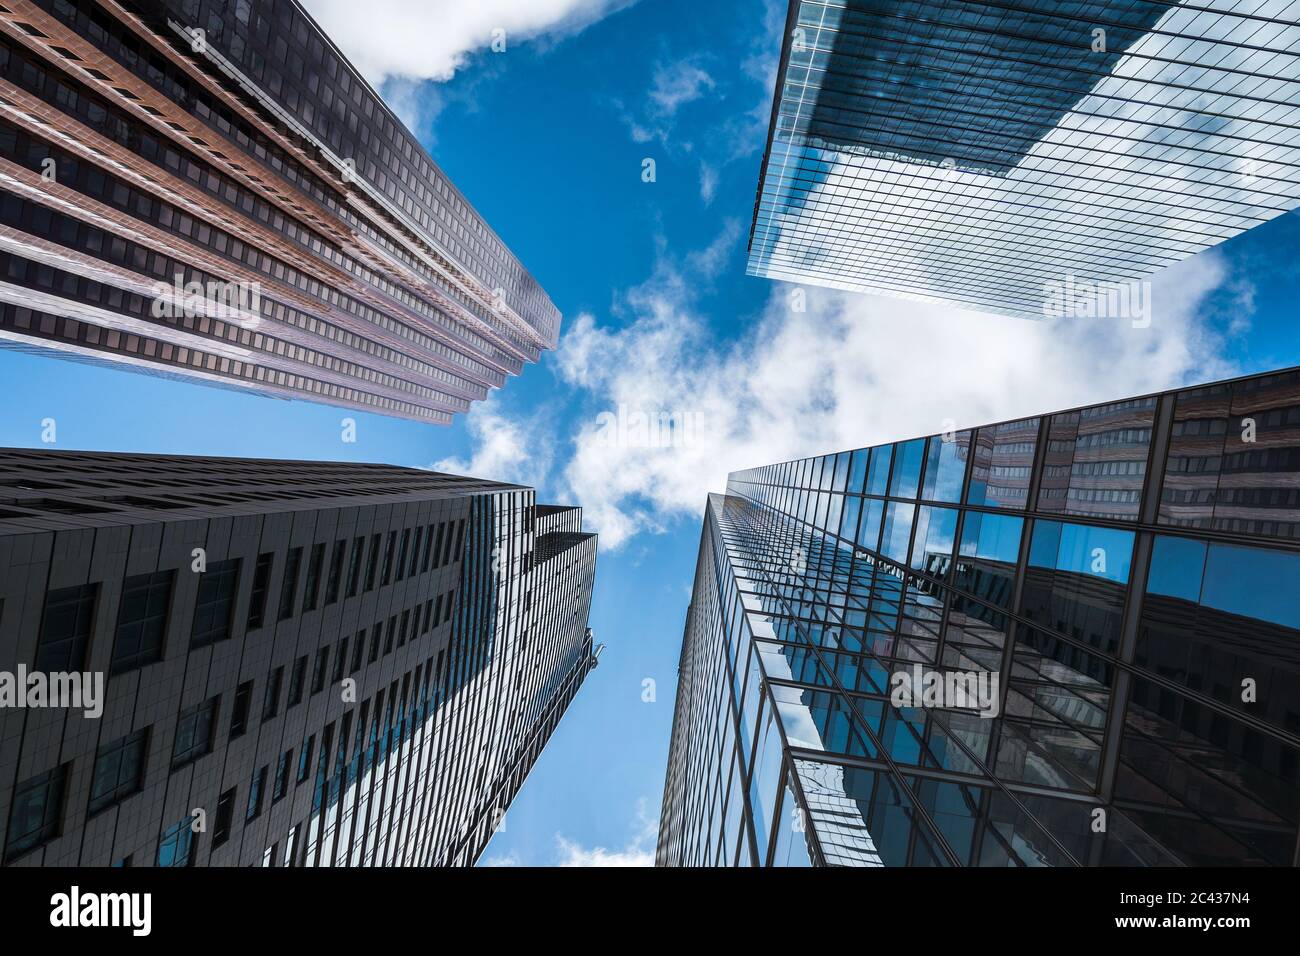 Business and finance concept, looking up at modern office building architecture in the financial district of Toronto, Ontario, Canada. Stock Photo